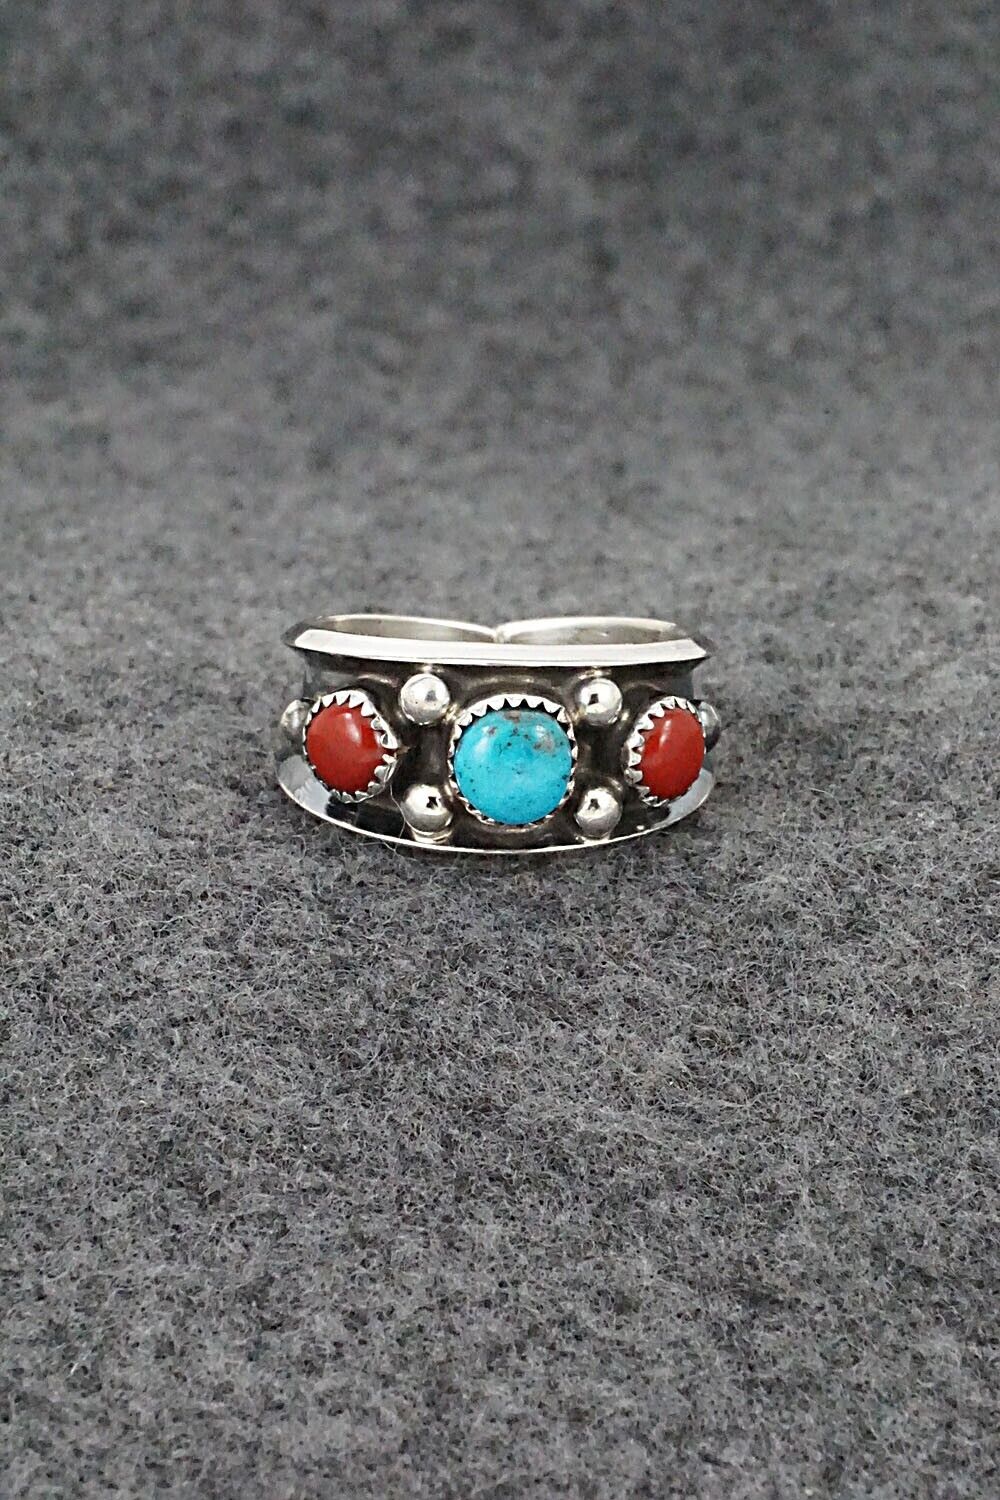 Turquoise, Coral & Sterling Silver Ring - Paul Largo - Size 10